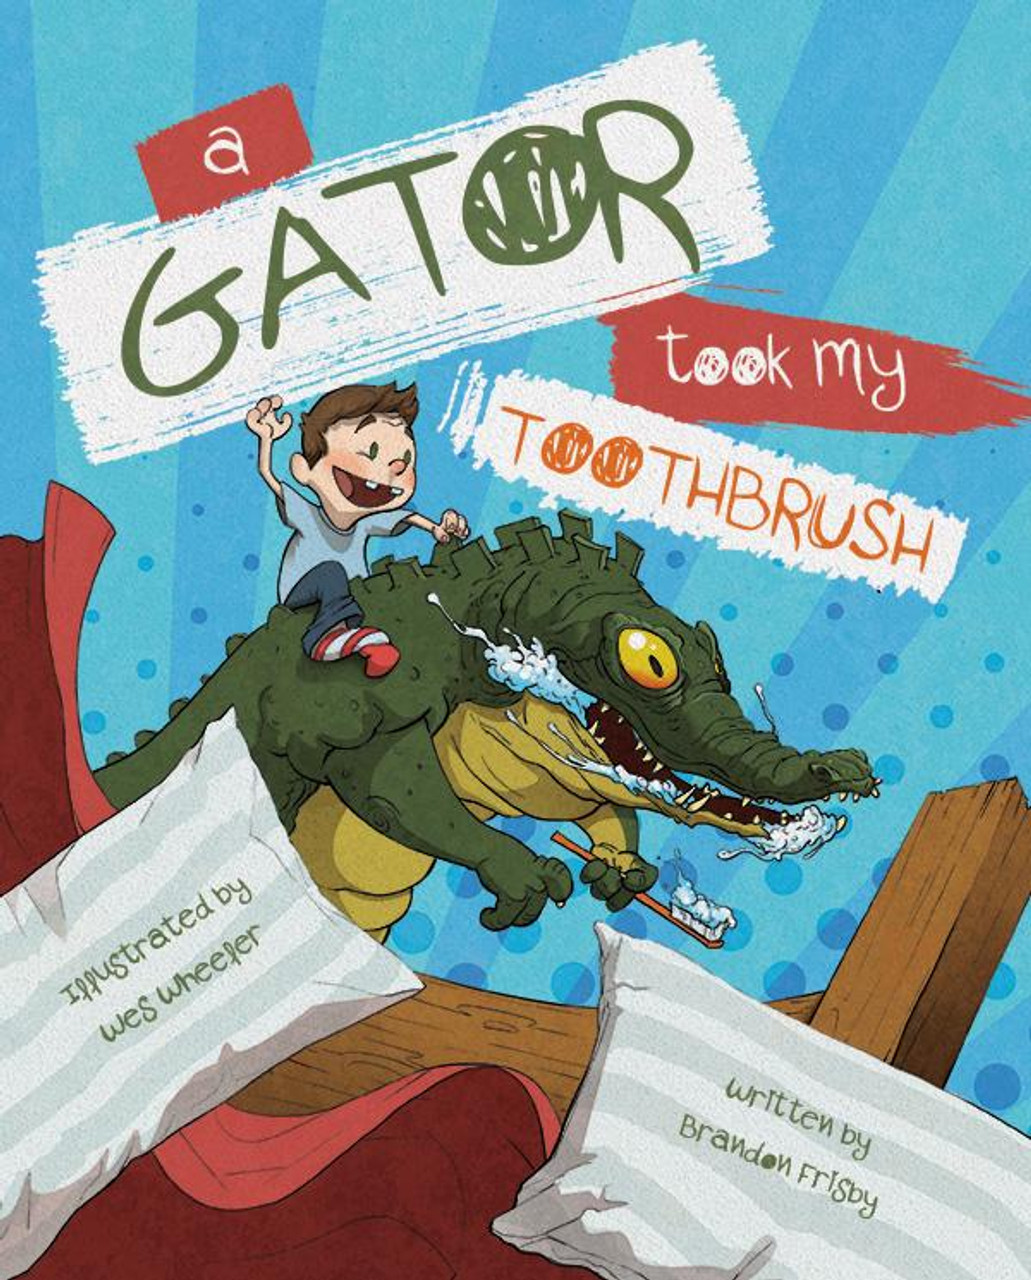 A Gator Took My Toothbrush (Hardcover)